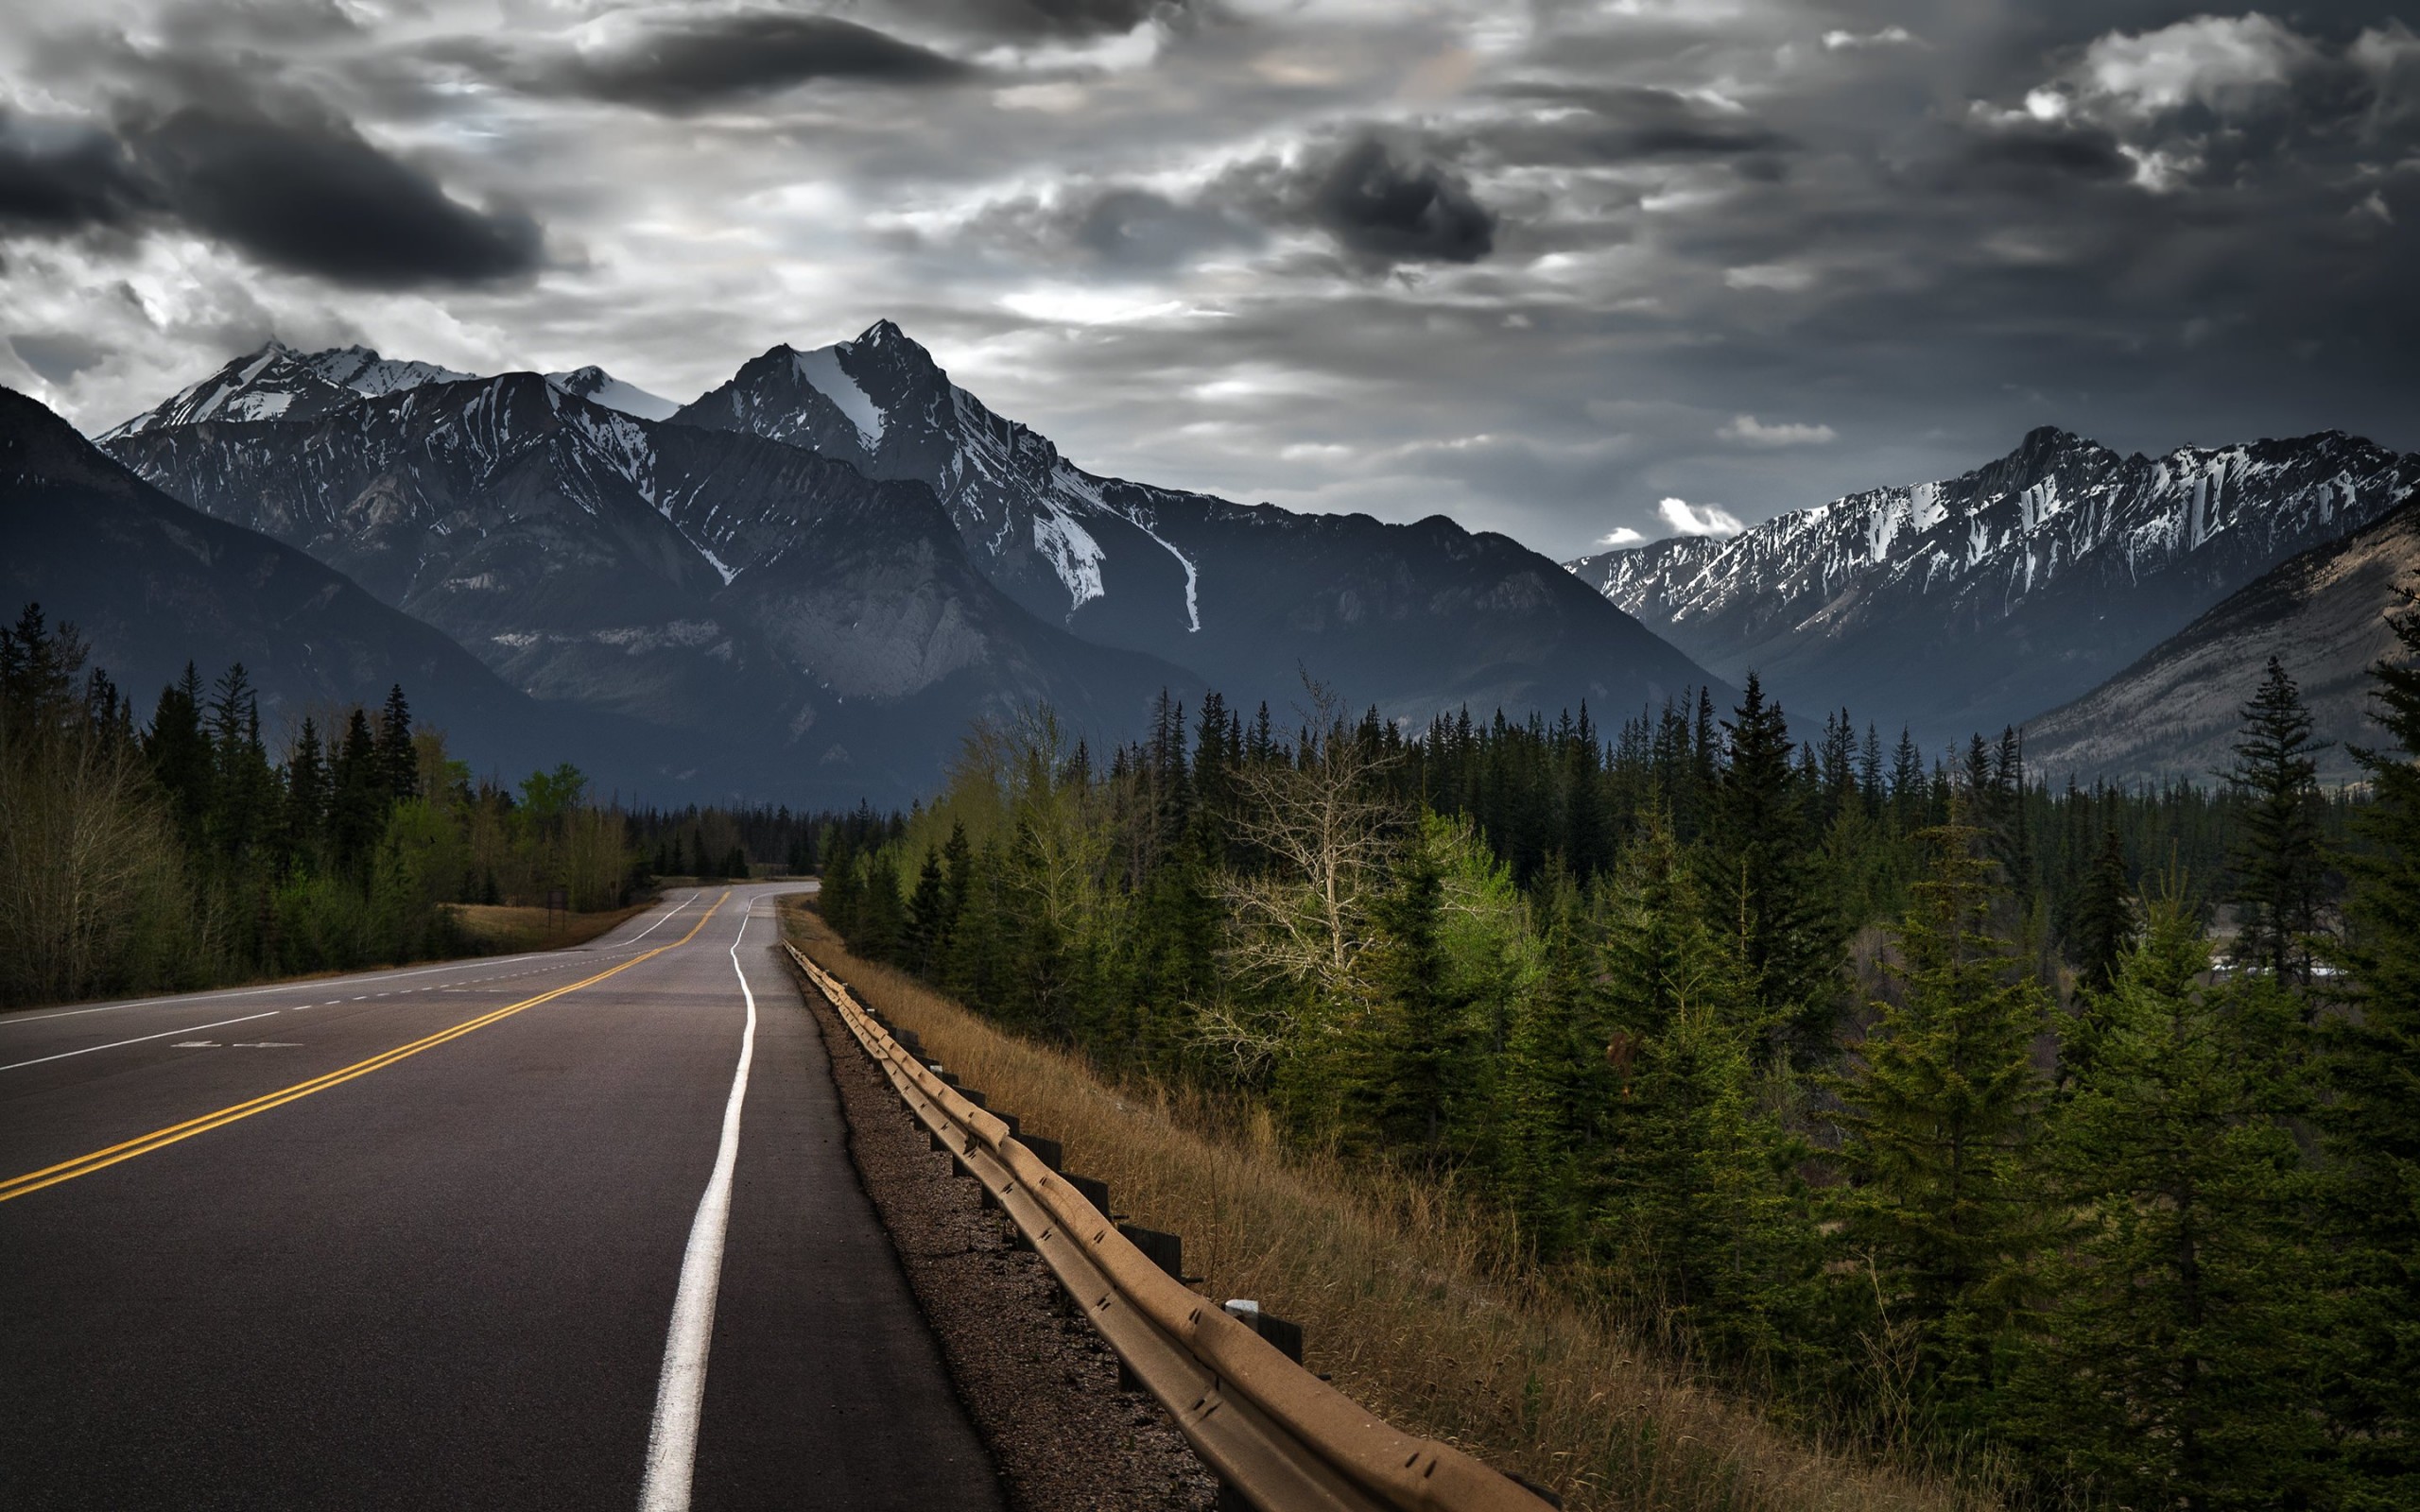 Road trip on a stormy day, Canada Wallpaper for Desktop 2560x1600